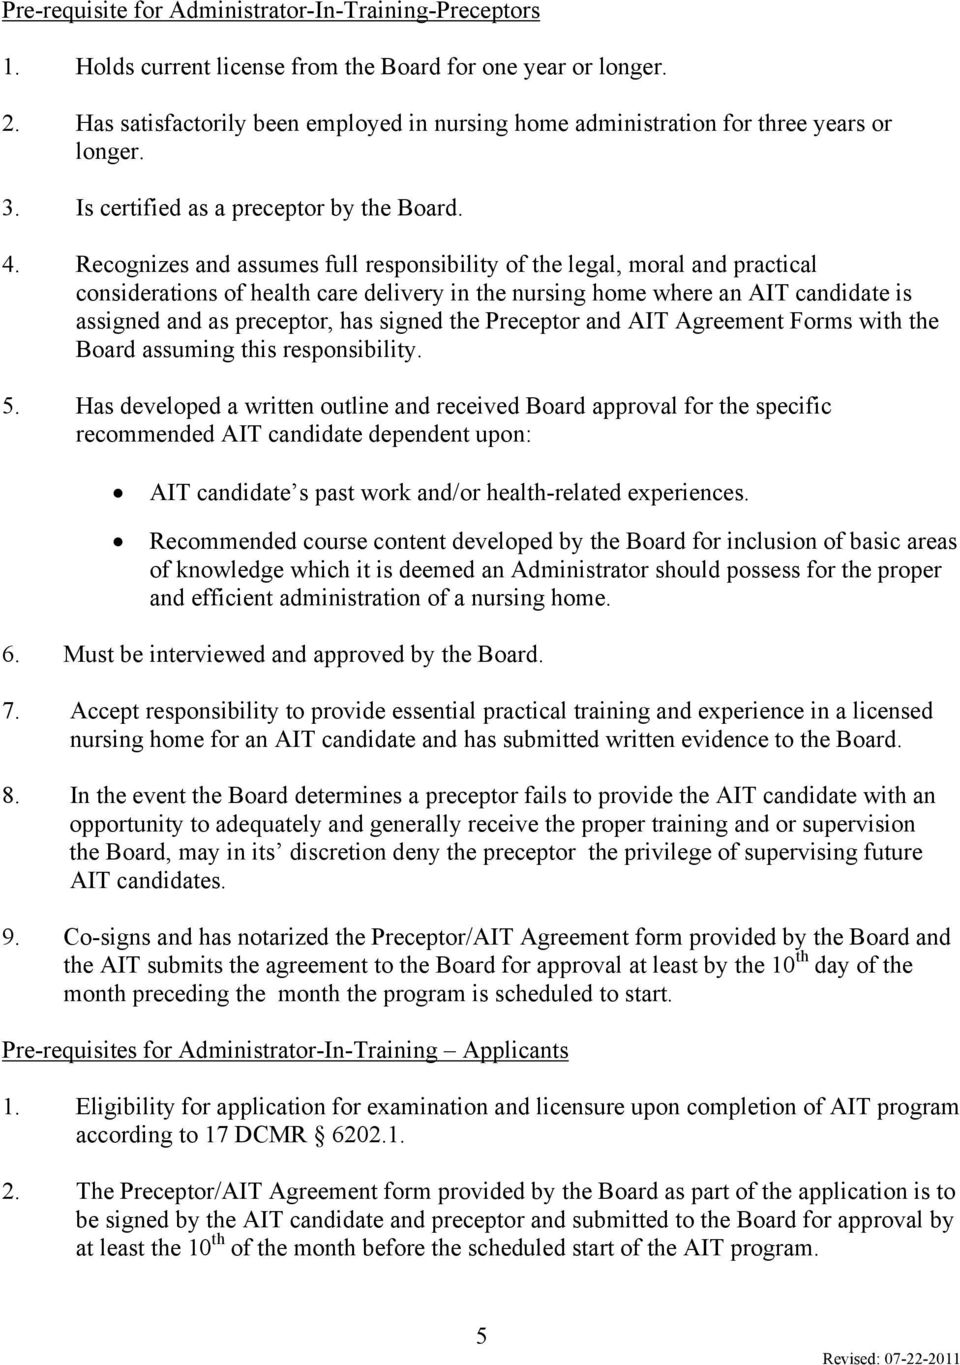 Recognizes and assumes full responsibility of the legal, moral and practical considerations of health care delivery in the nursing home where an AIT candidate is assigned and as preceptor, has signed